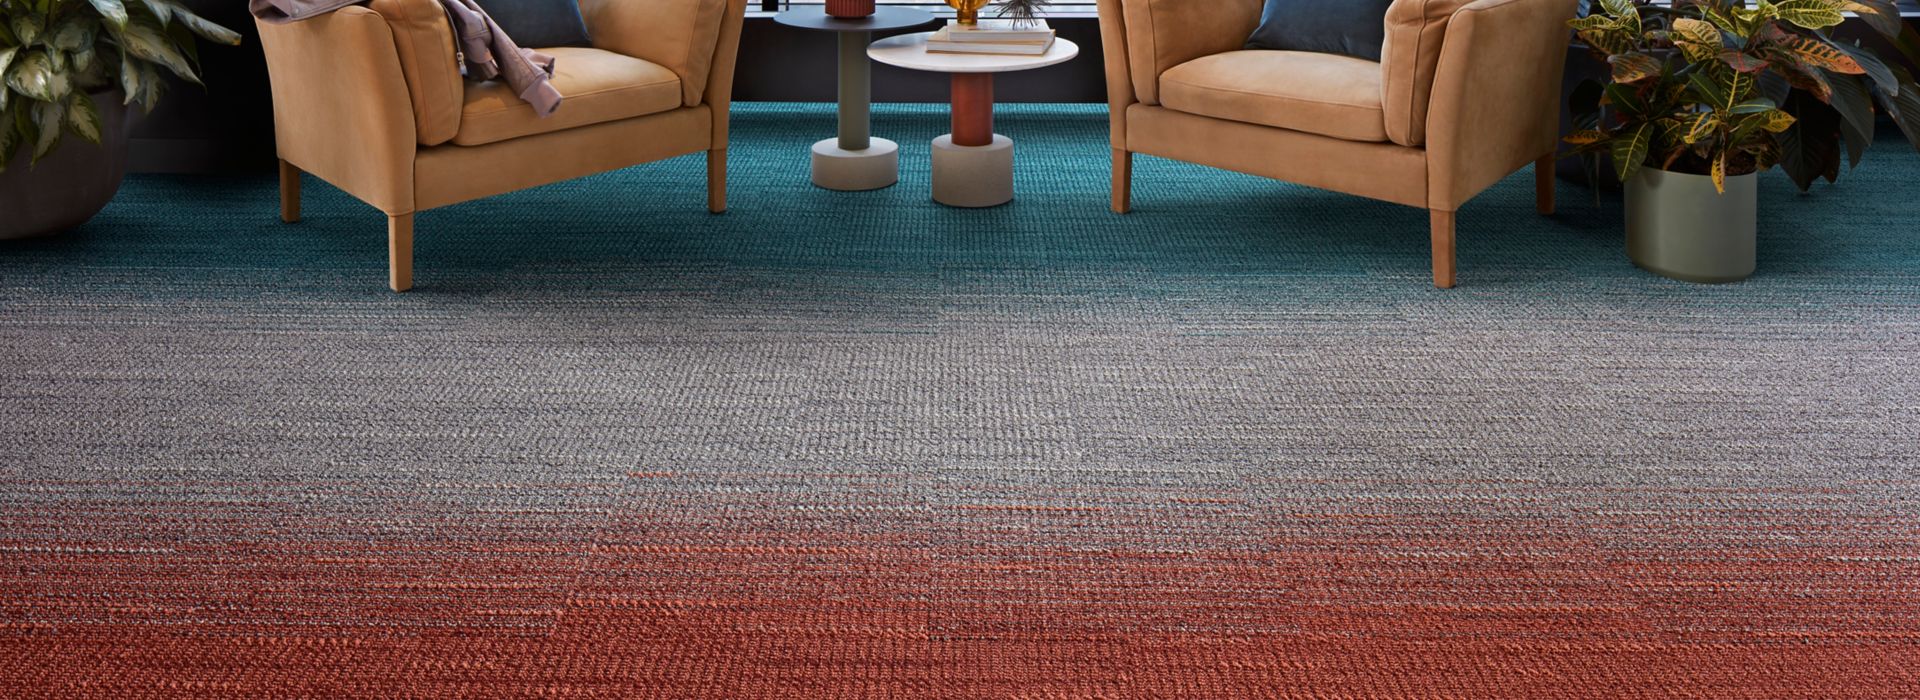 Interface WG100 and WG200 carpet tile in lobby image number 1